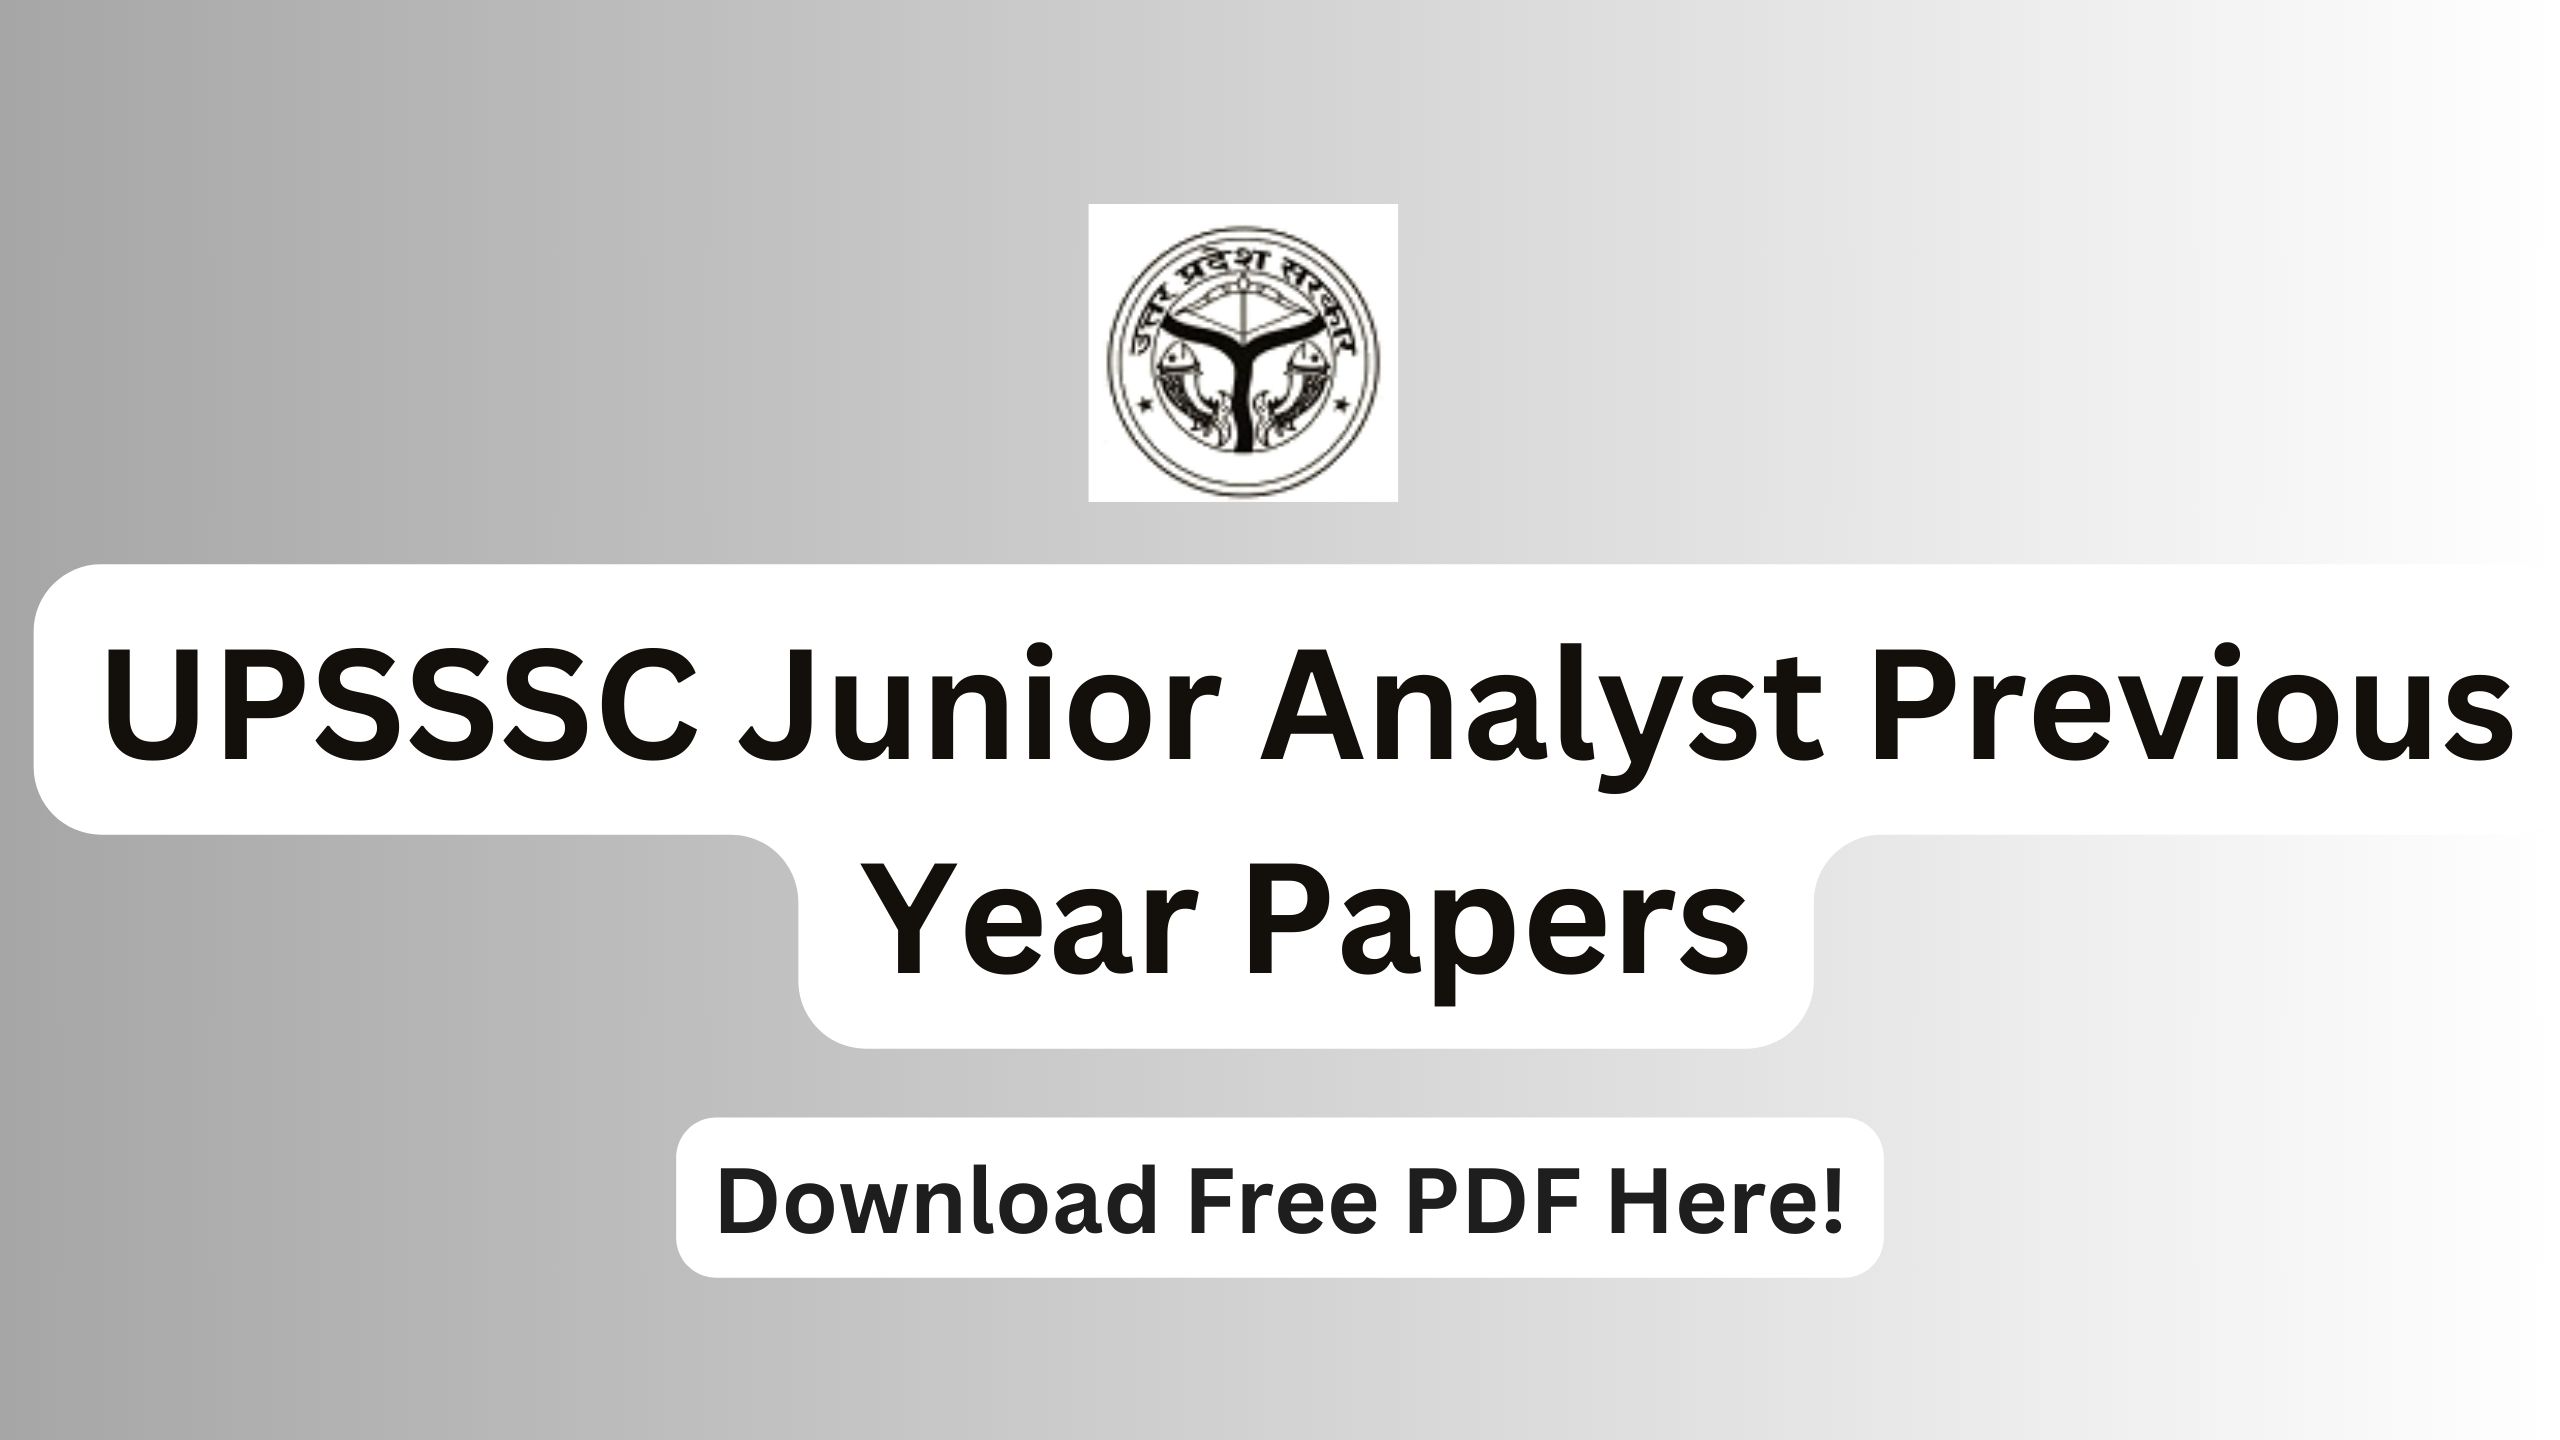 UPSSSC Junior Analyst Previous Year Papers